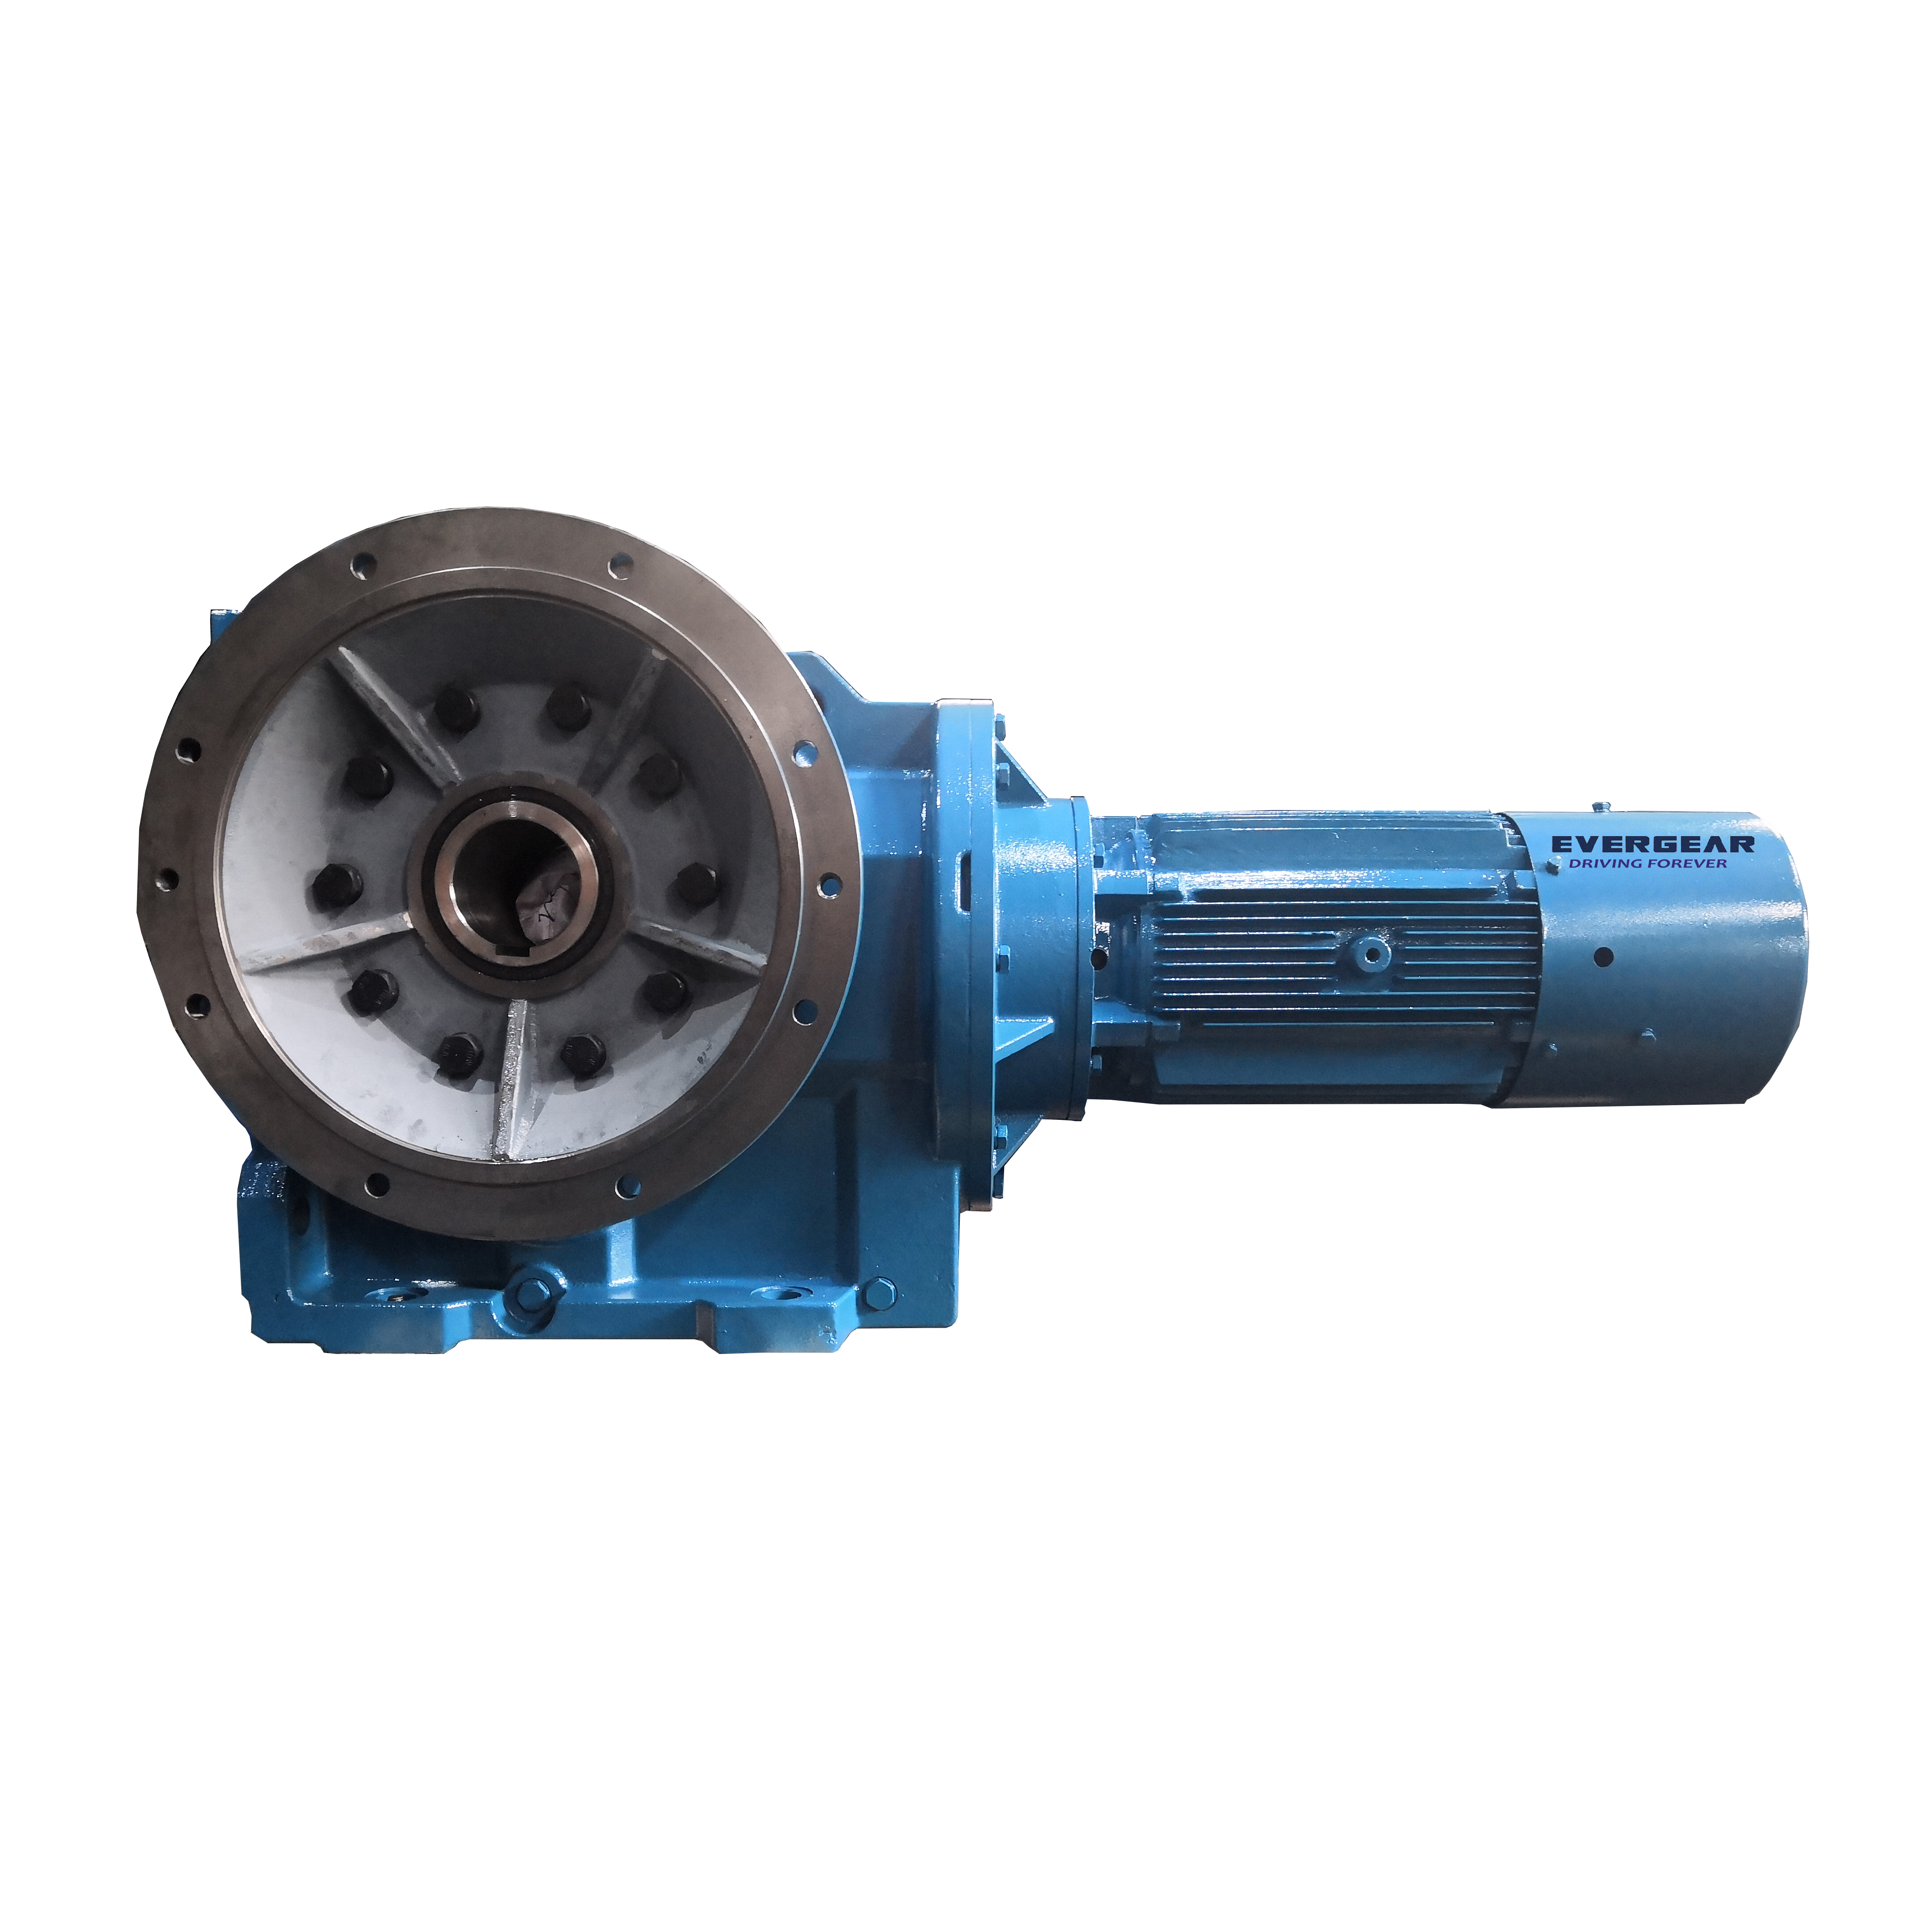 High Torque DC Motor Right Angle Bevel Gear Motor for Conveyor Belt gearbox reduction ratio 251